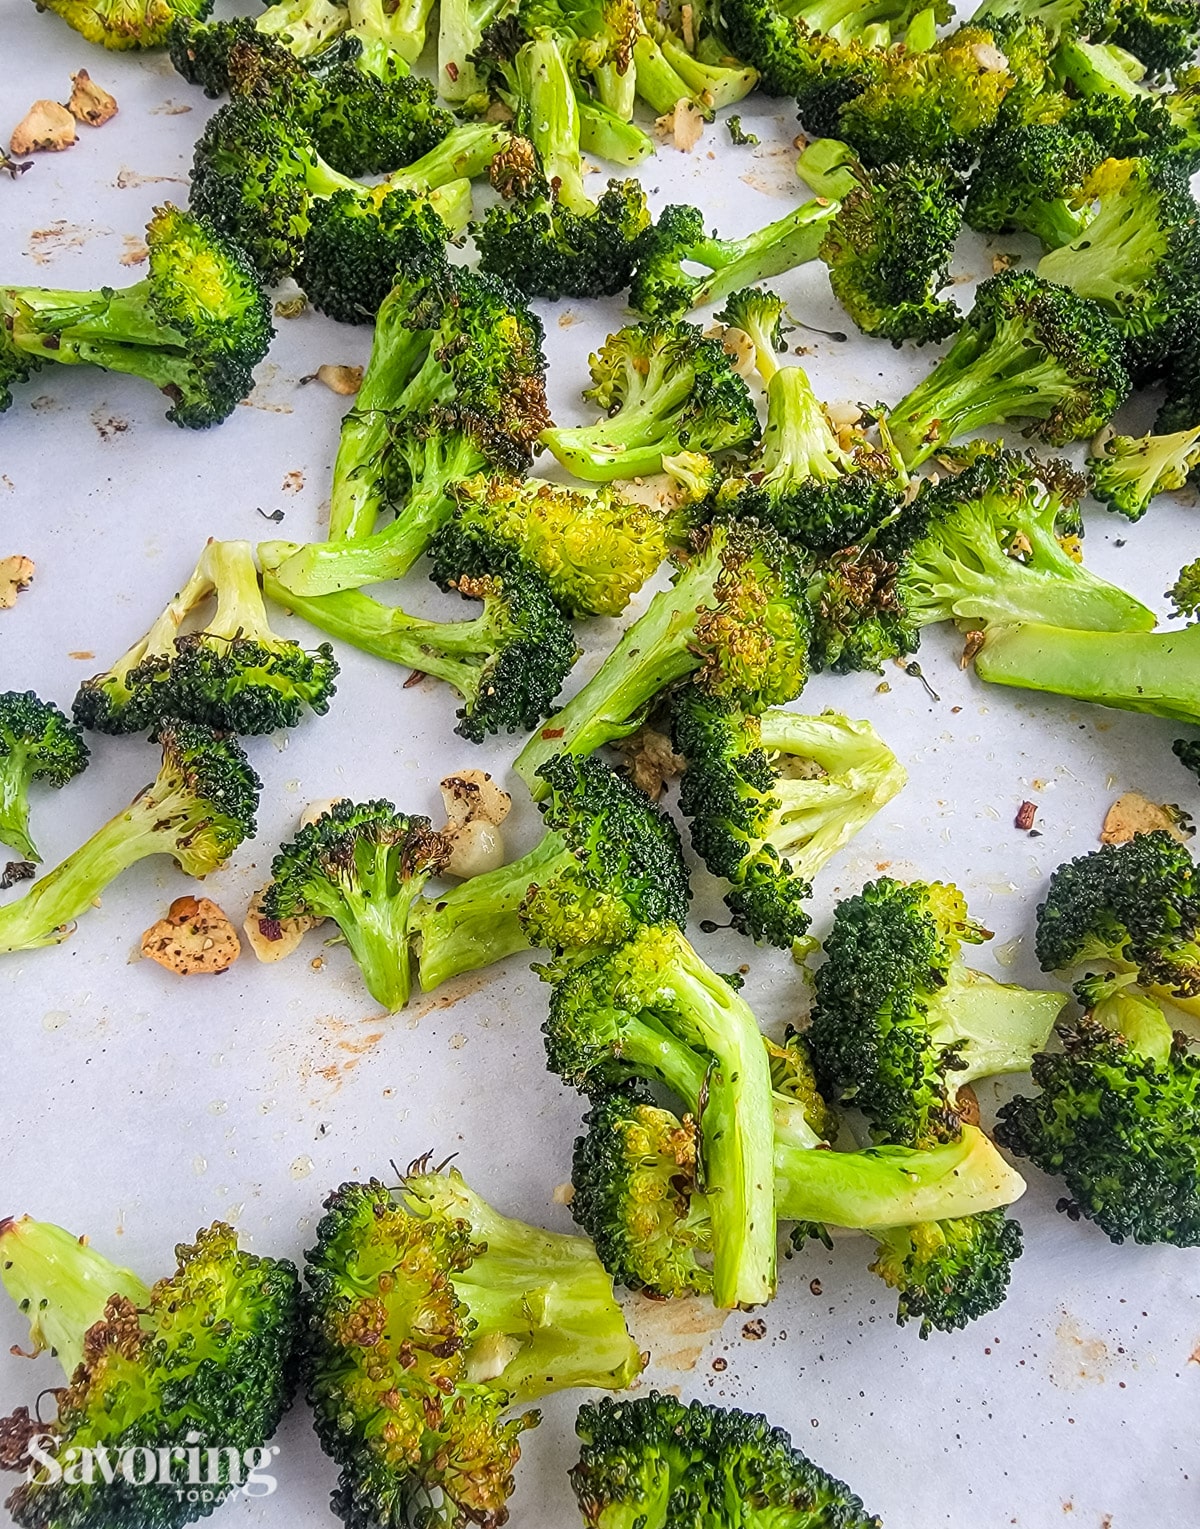 Broccoli on a sheet pan that has been roasted with sliced garlic.